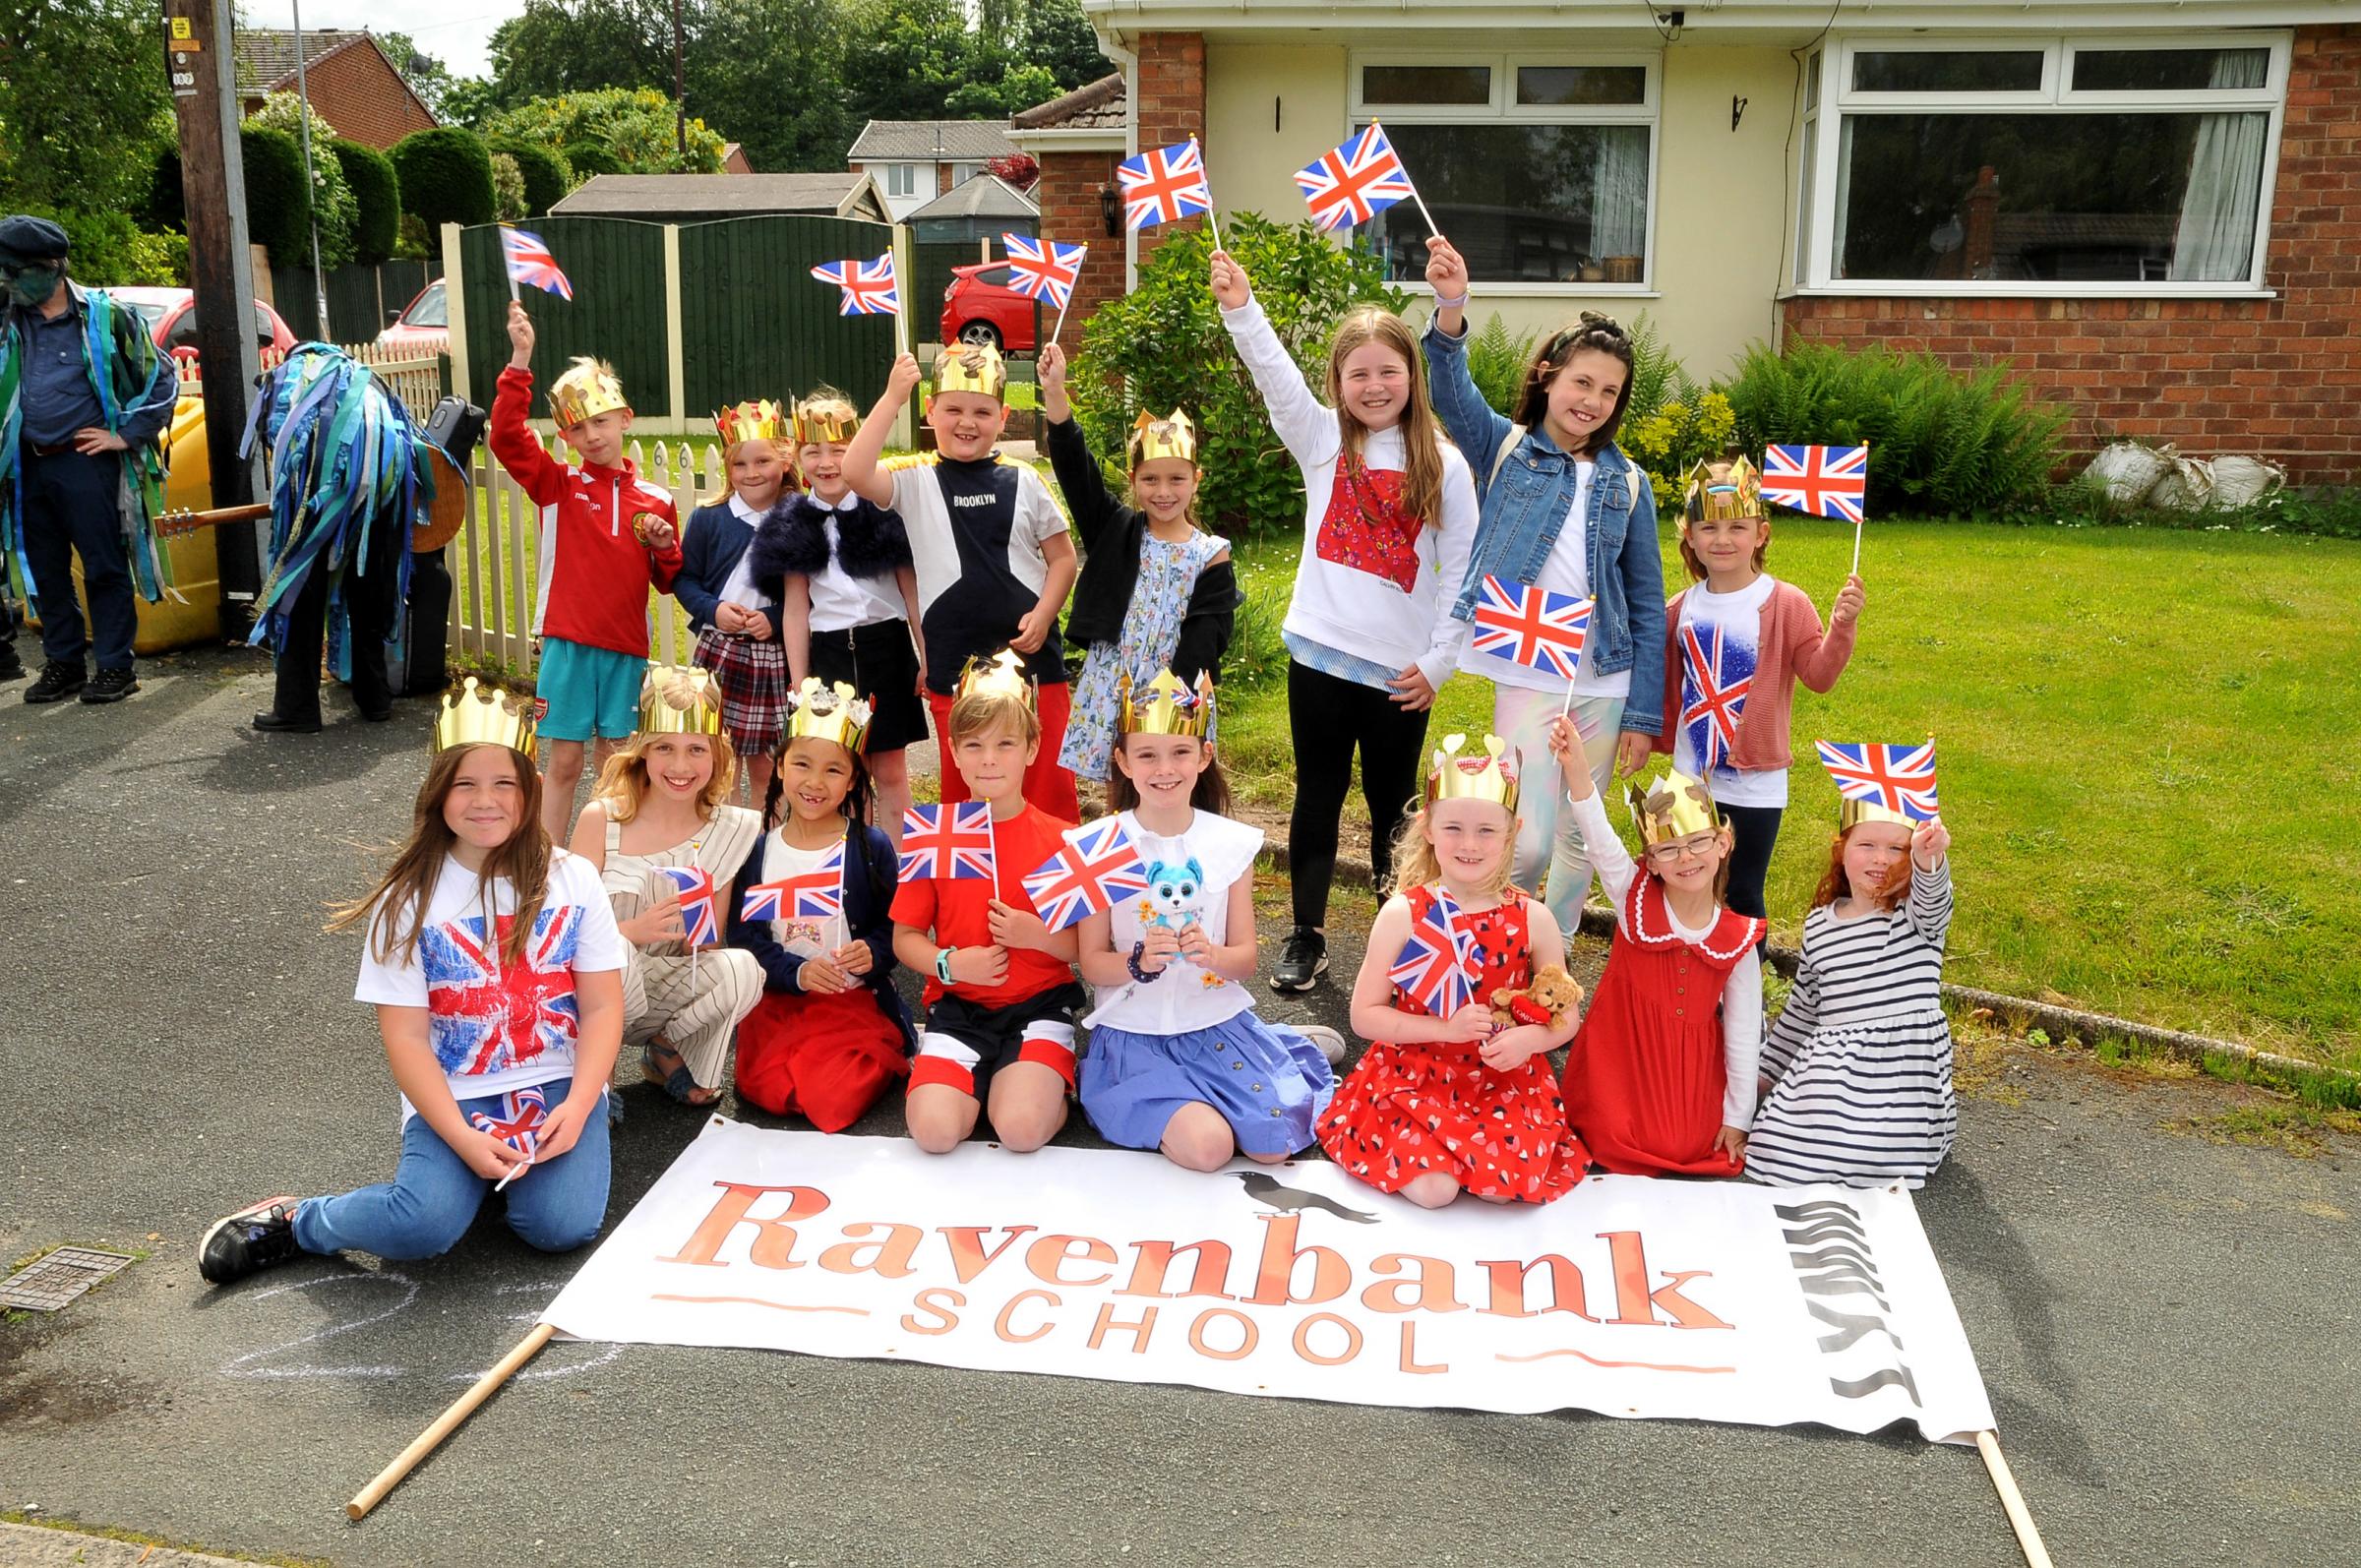 Ravenbank Primary School youngsters